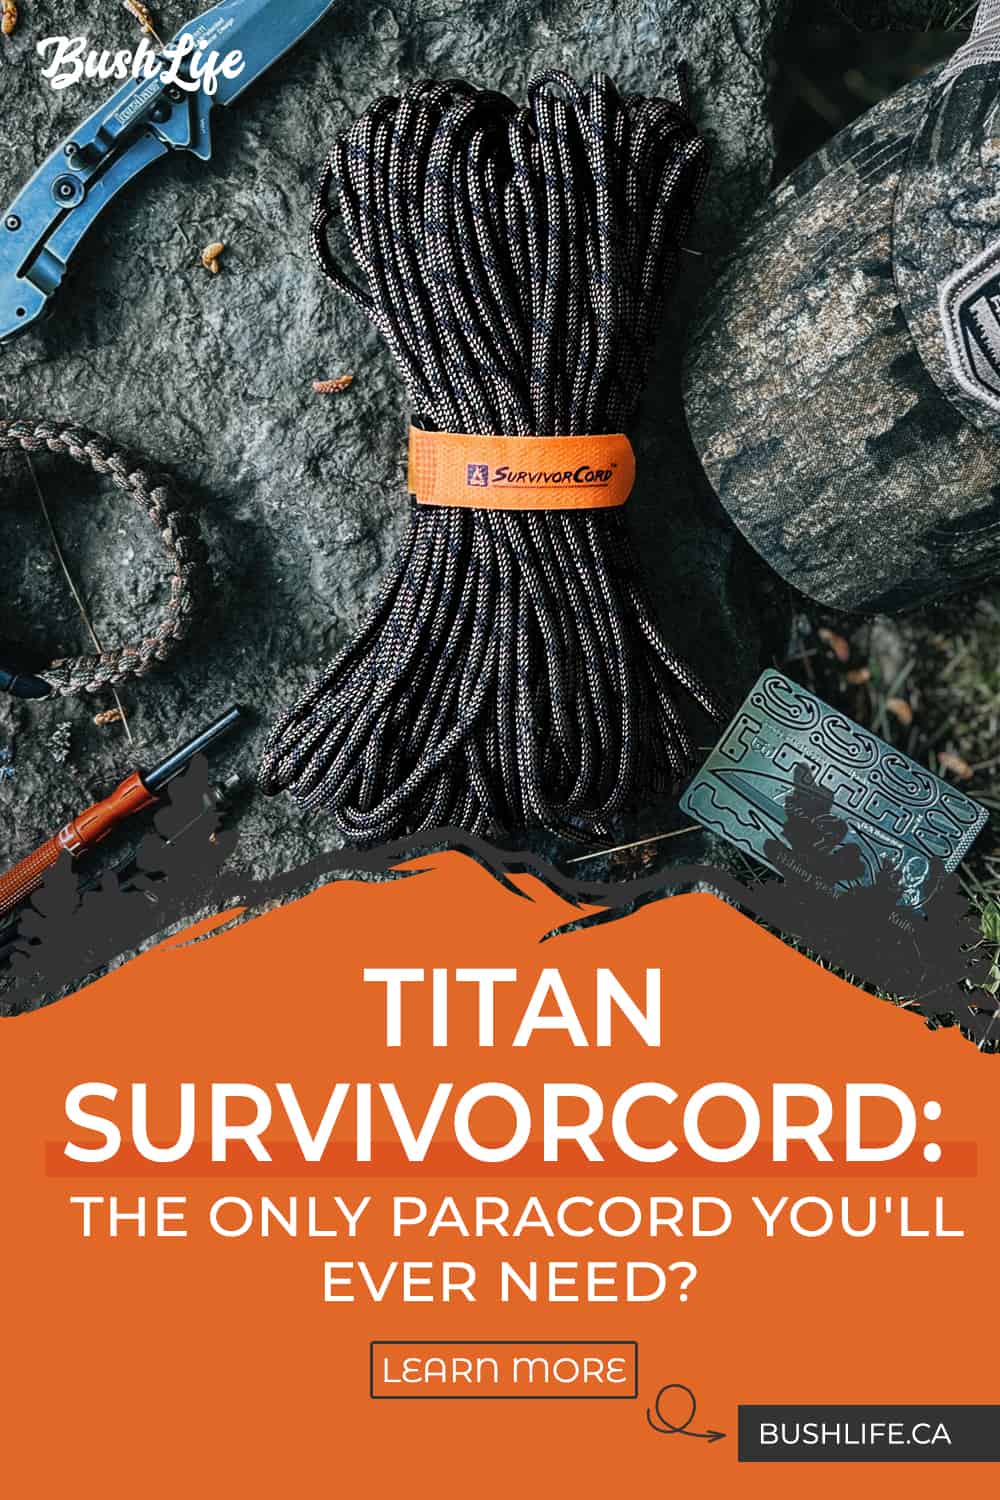 TITAN SurvivorCord w/ Integrated Fishing Line, Fire-Starter, and Snare Wire